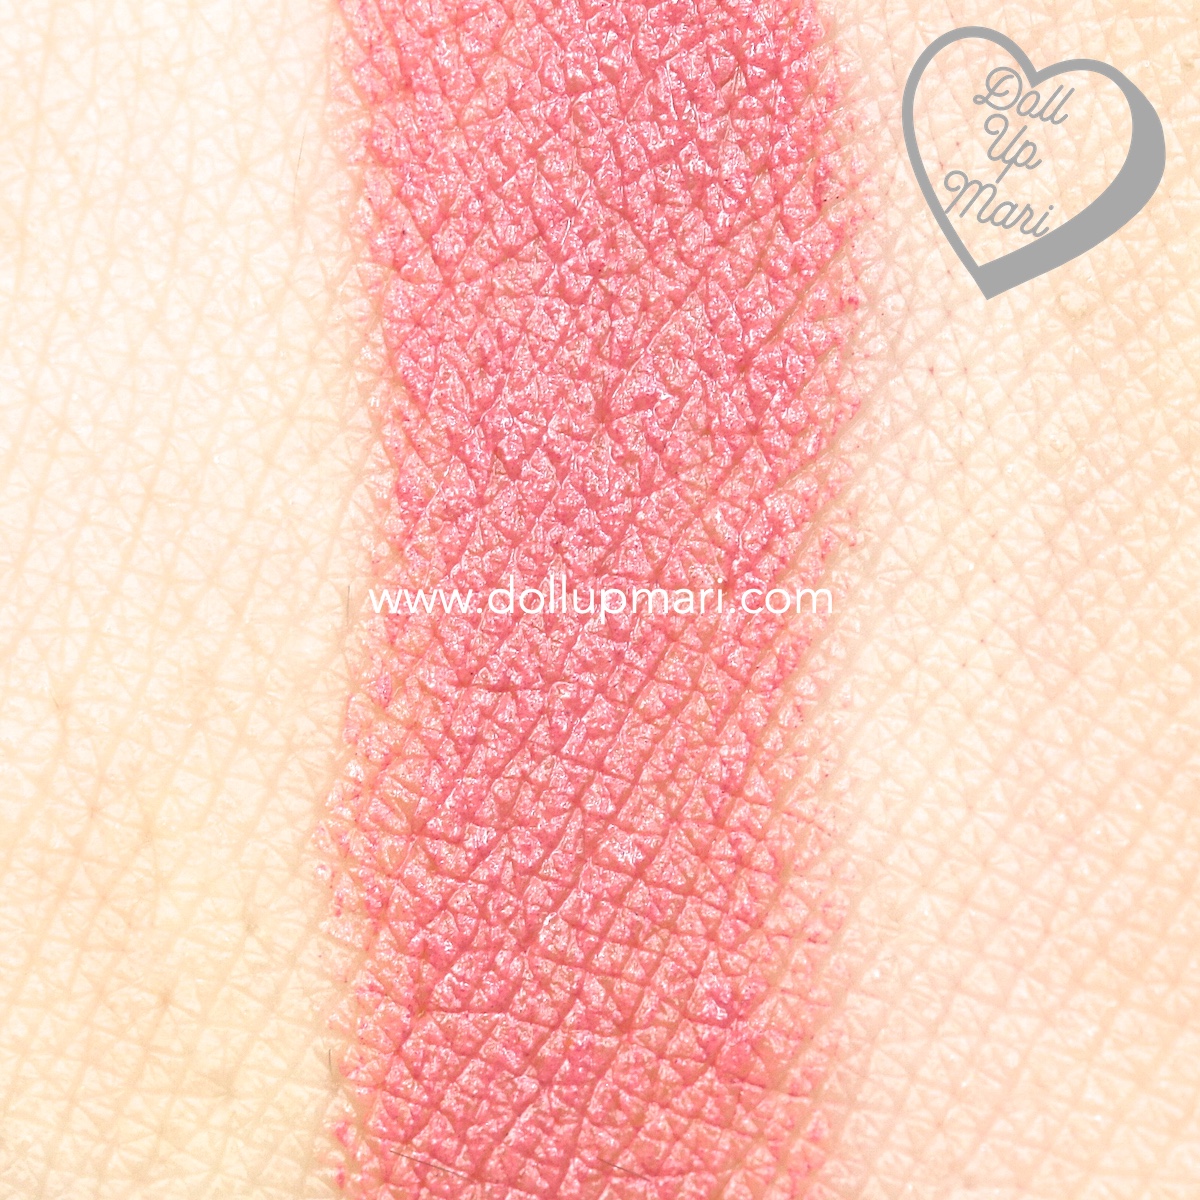 swatch of Pure Pink shade of AVON Perfectly Matte Lipstick